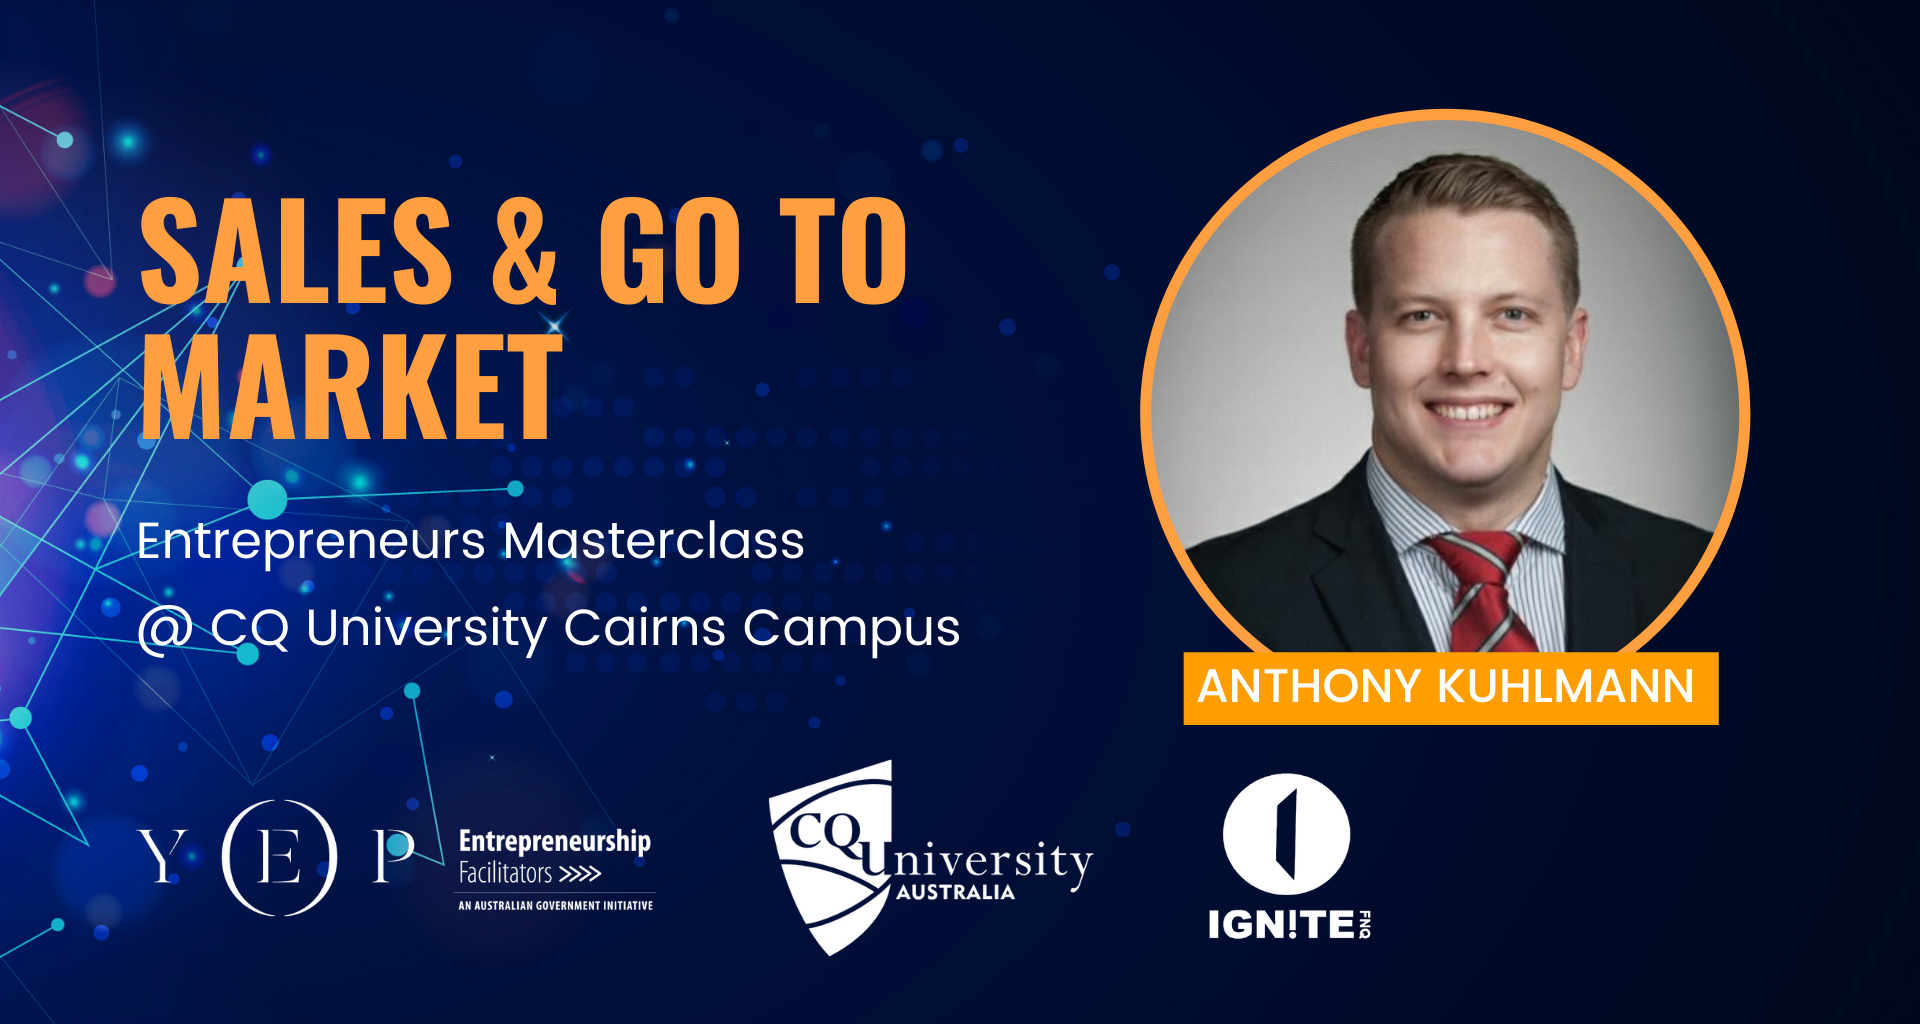 Sales & Go to Market Masterclass with Anthony Kuhlmann